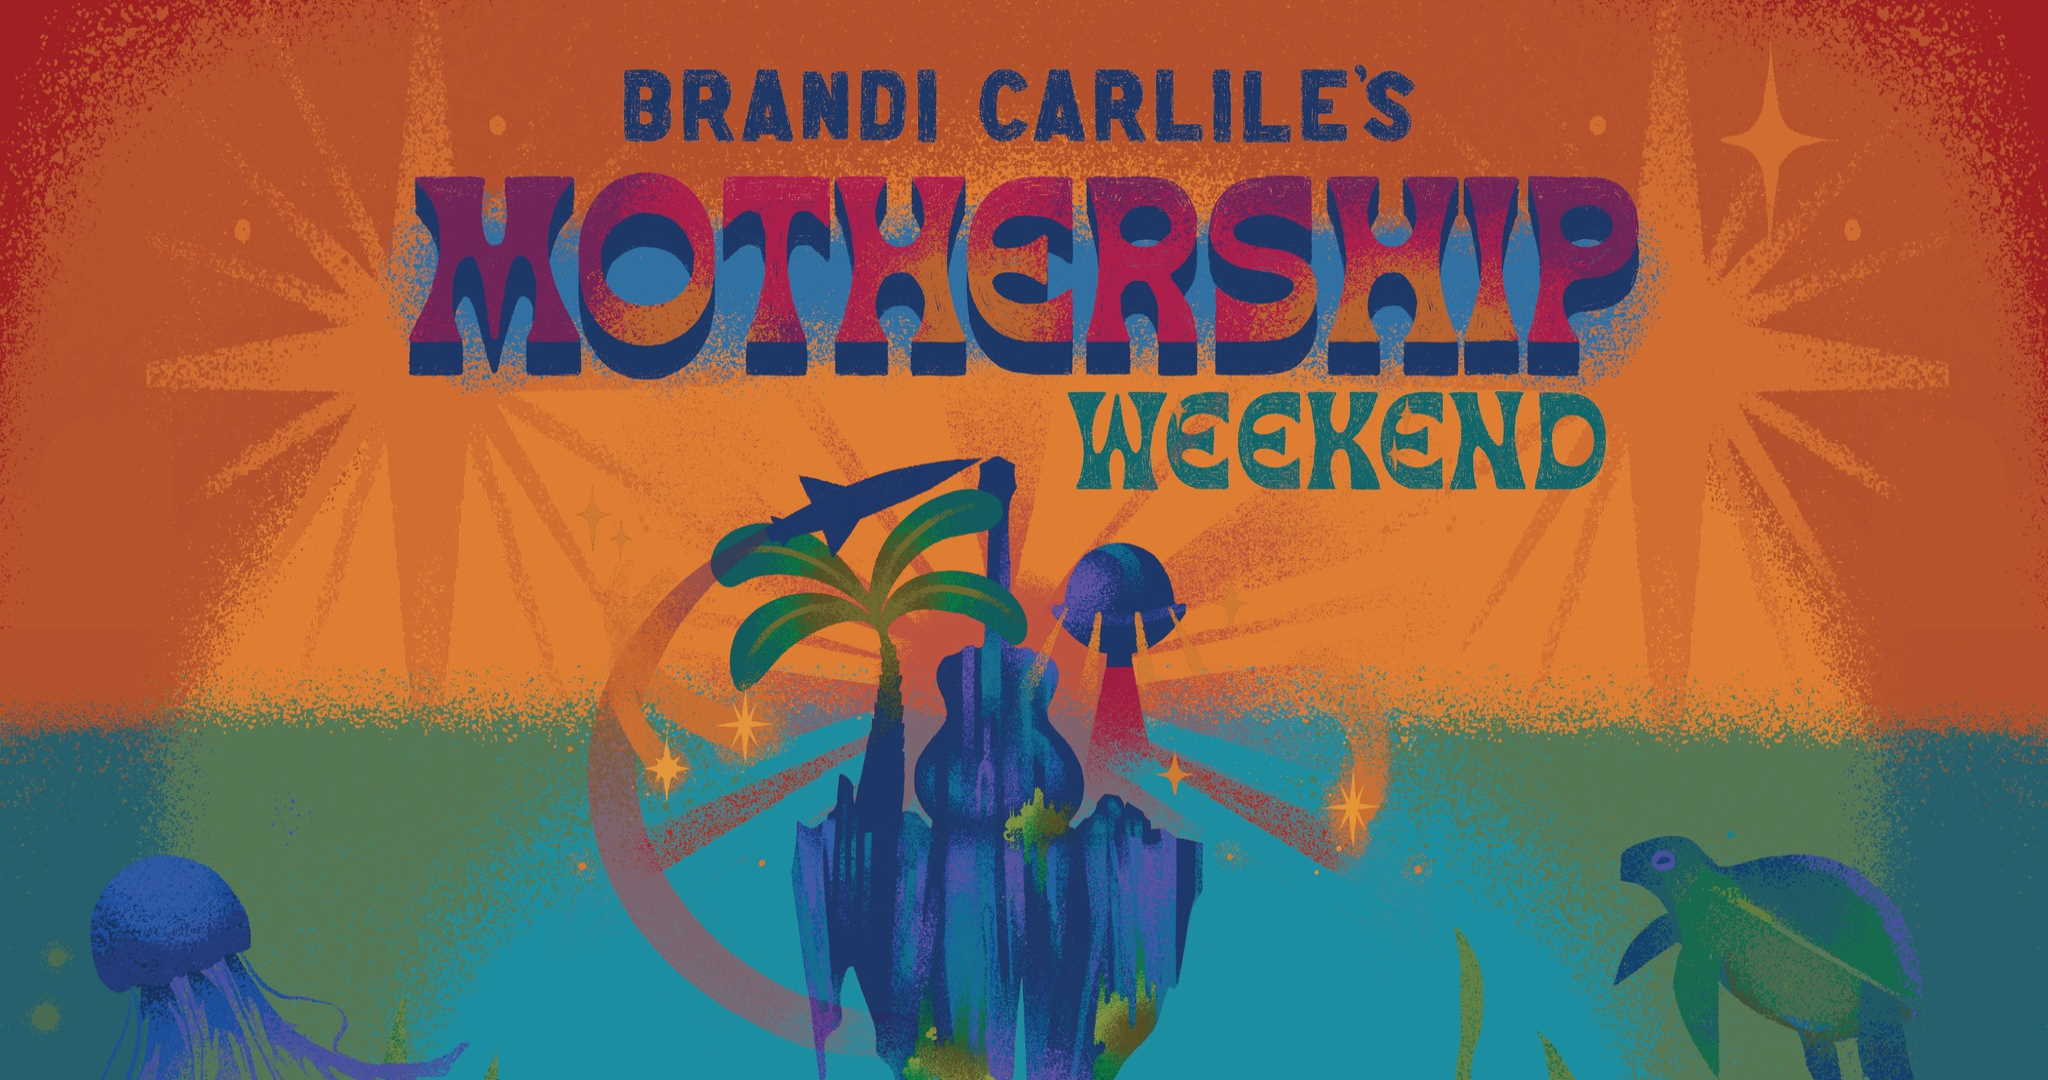 Brandi Carlile to Host Inaugural Mothership Weekend Event with Mavis Staples, Nathaniel Rateliff, Hoizer and More